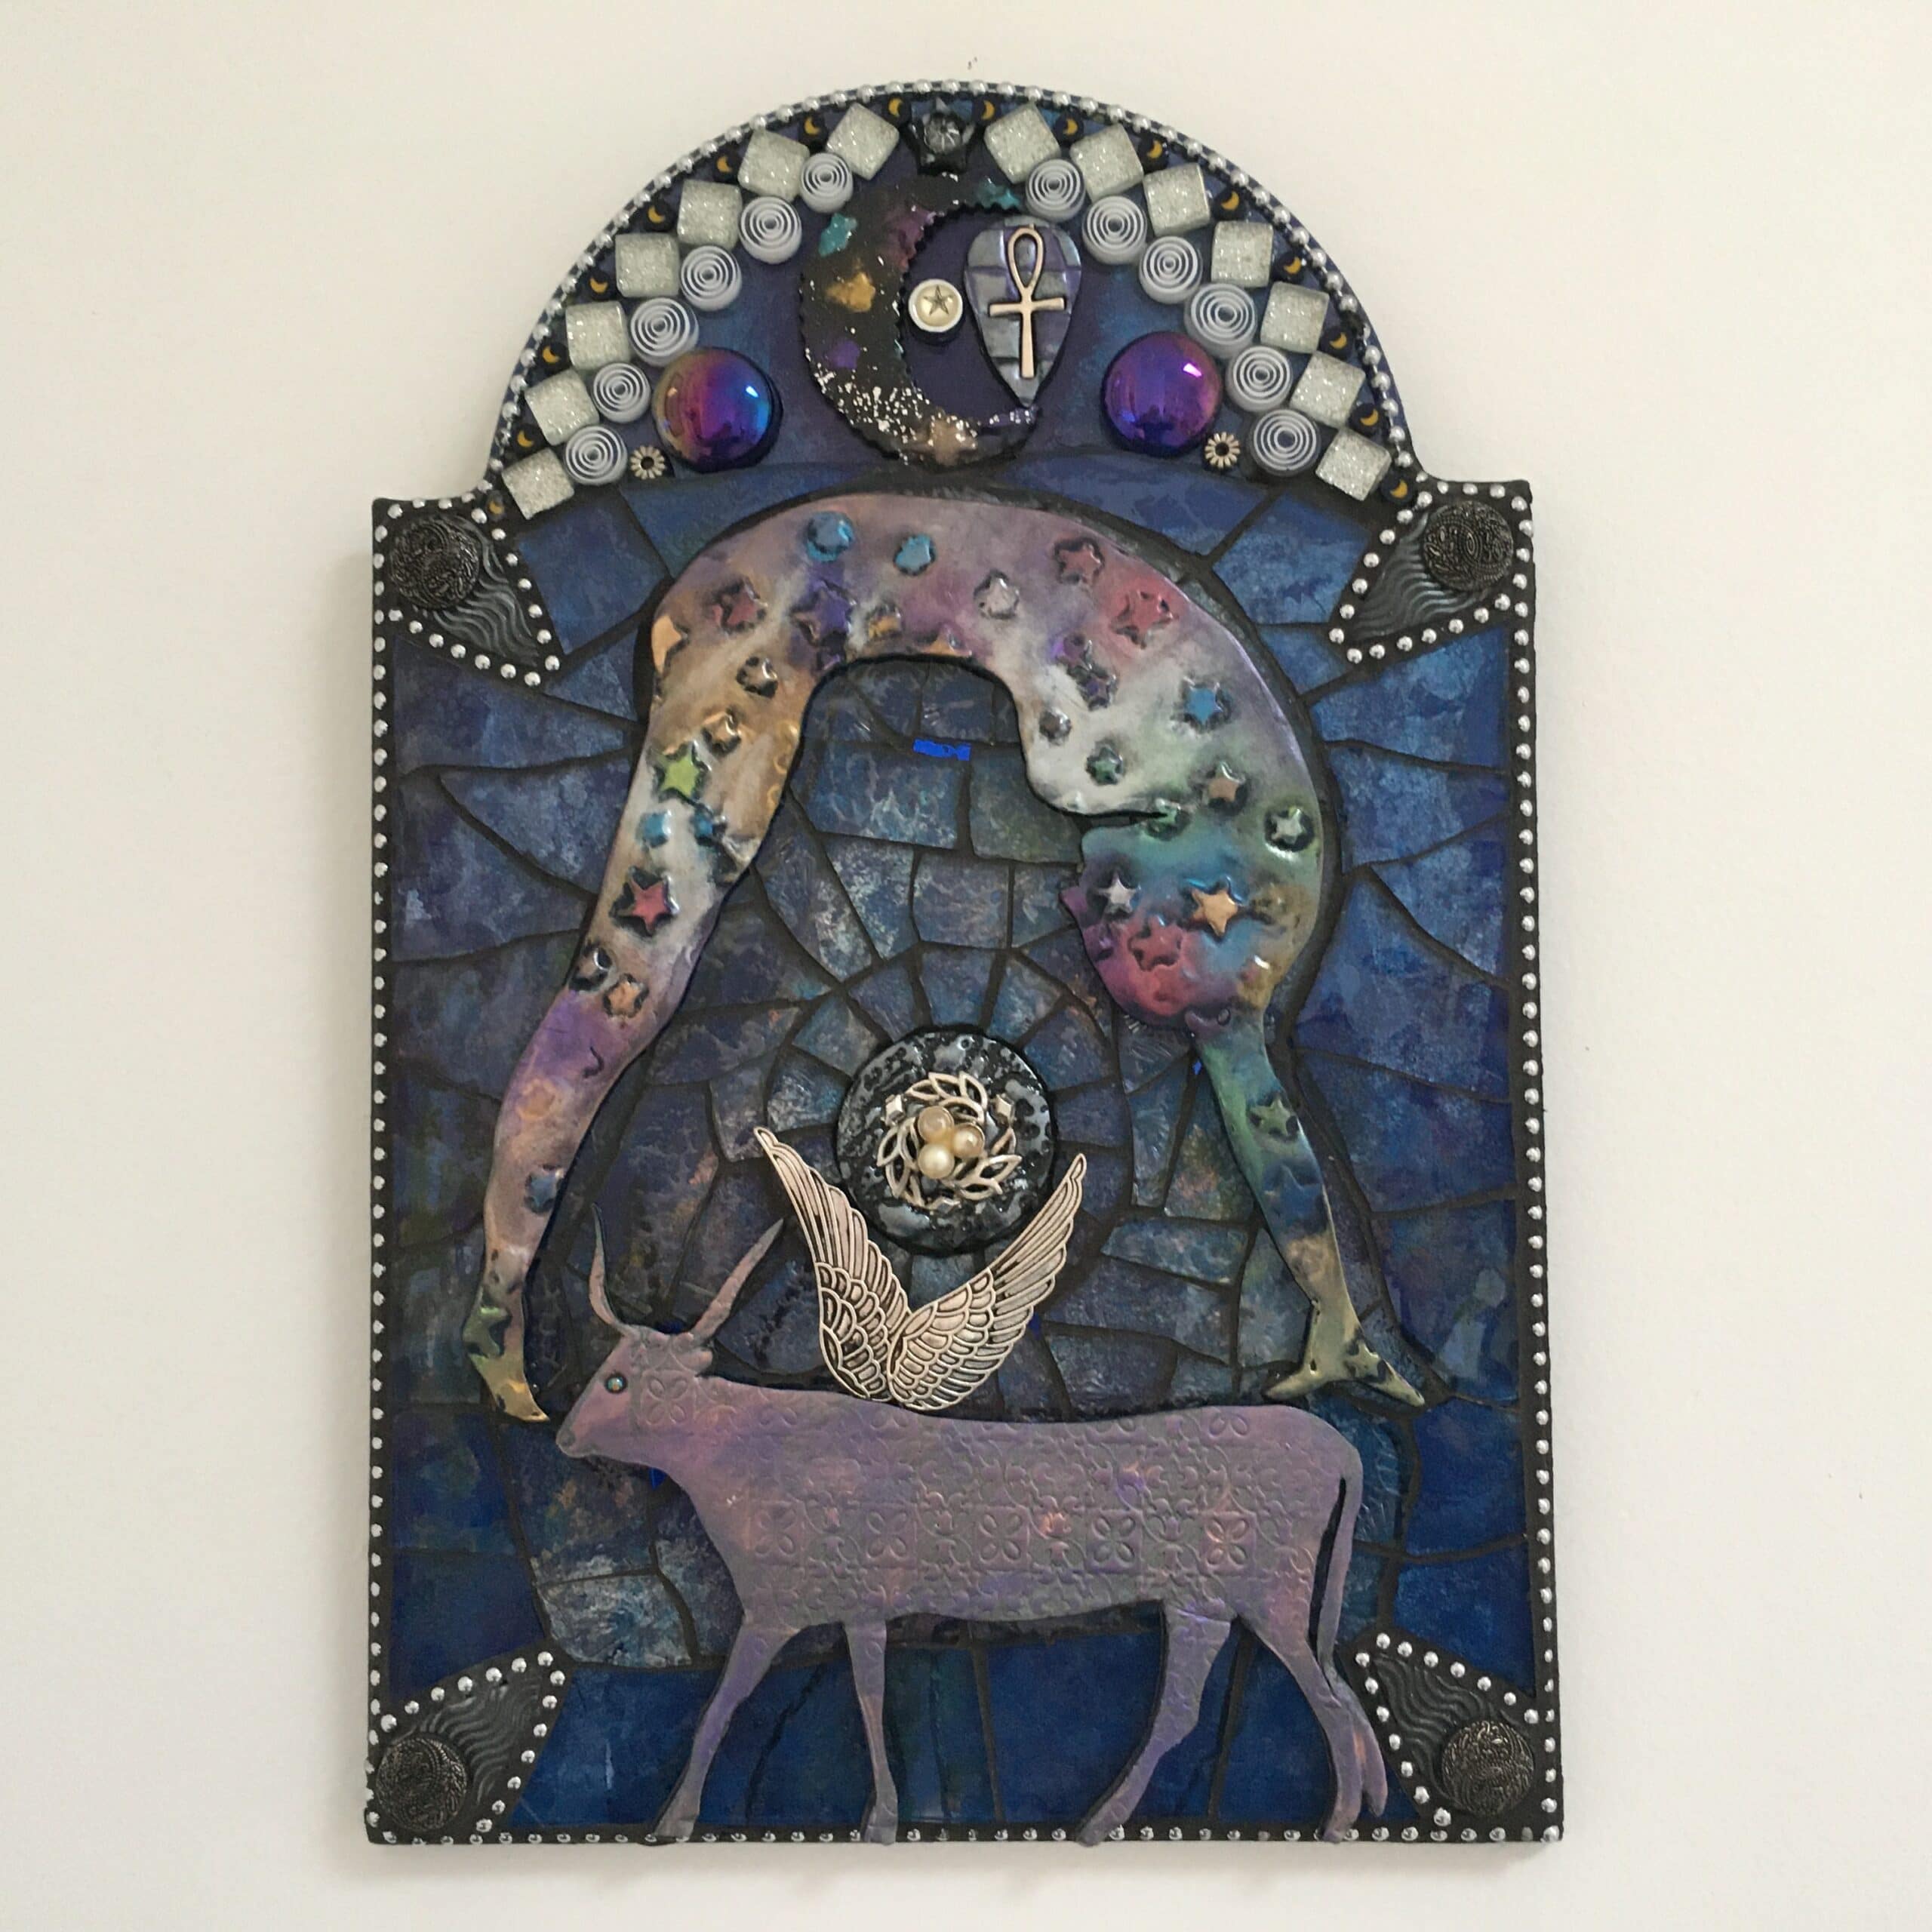 A mixed media mosaic featuring the side profile of a nude female figure bent across the sky with a large horned and winged cow beneath her.